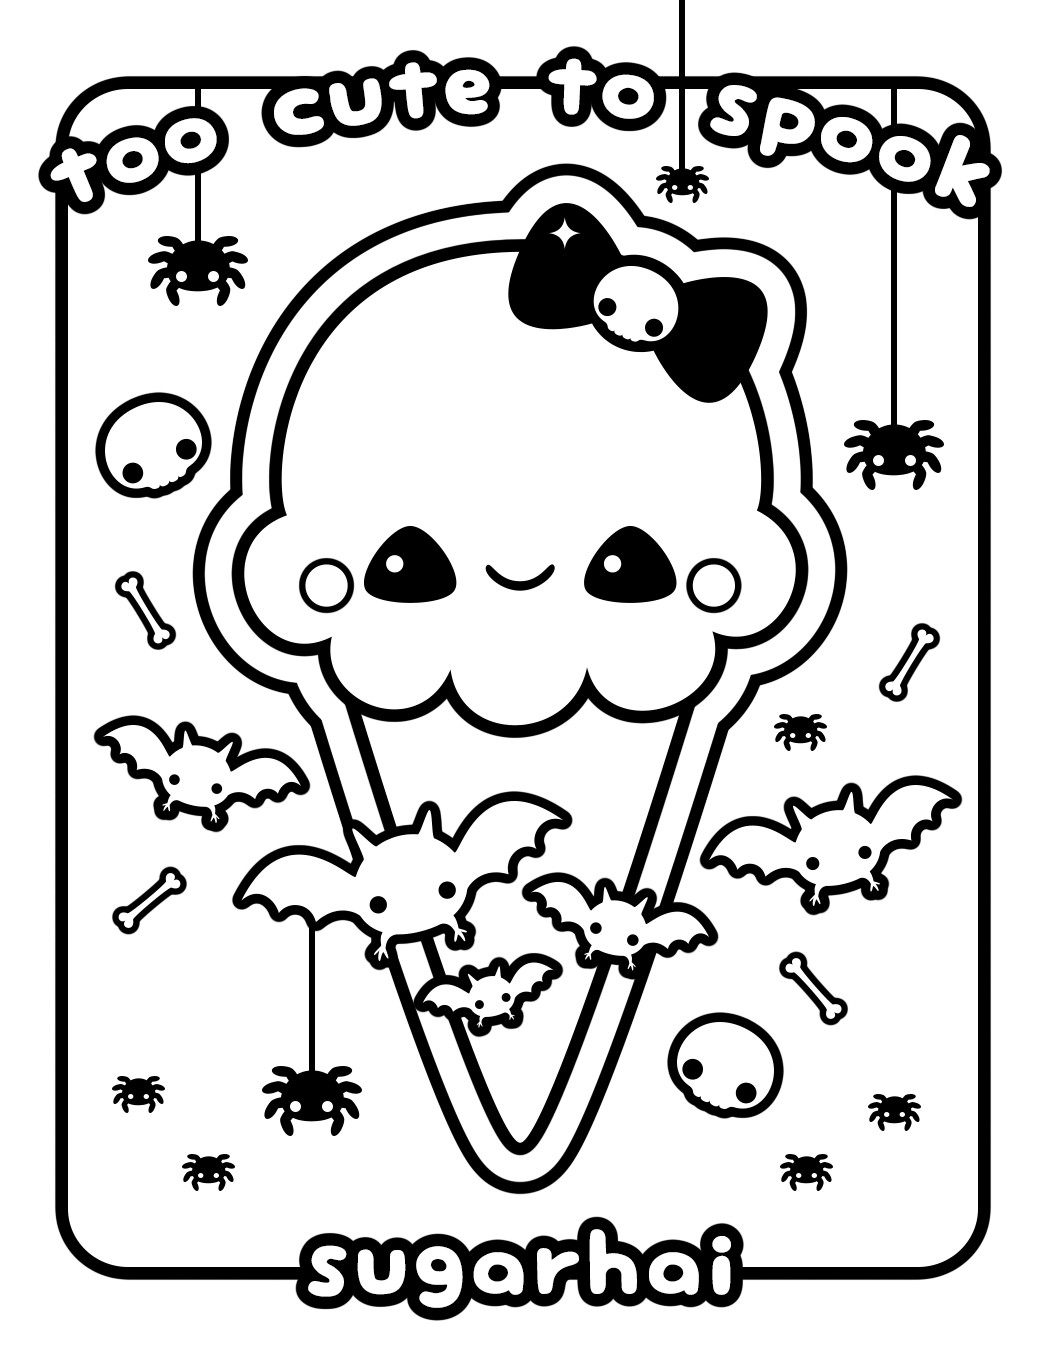 Cute Food Coloring Pages at Free printable colorings